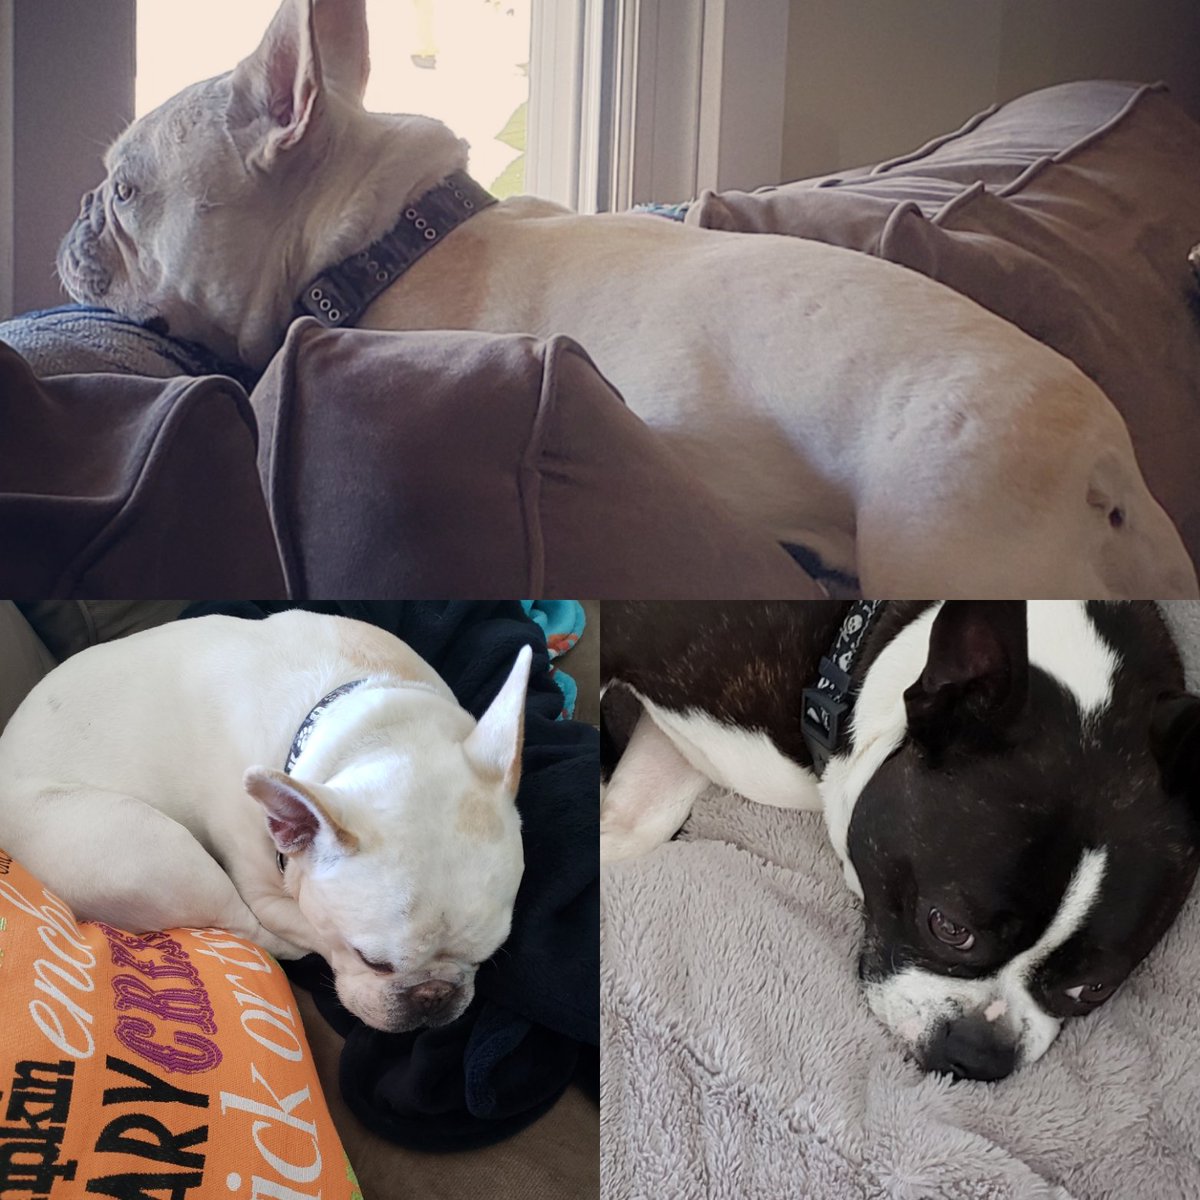 It's a dog's life here at my place. #spoileddogs #naptime #bostonterrier #FrenchBulldog